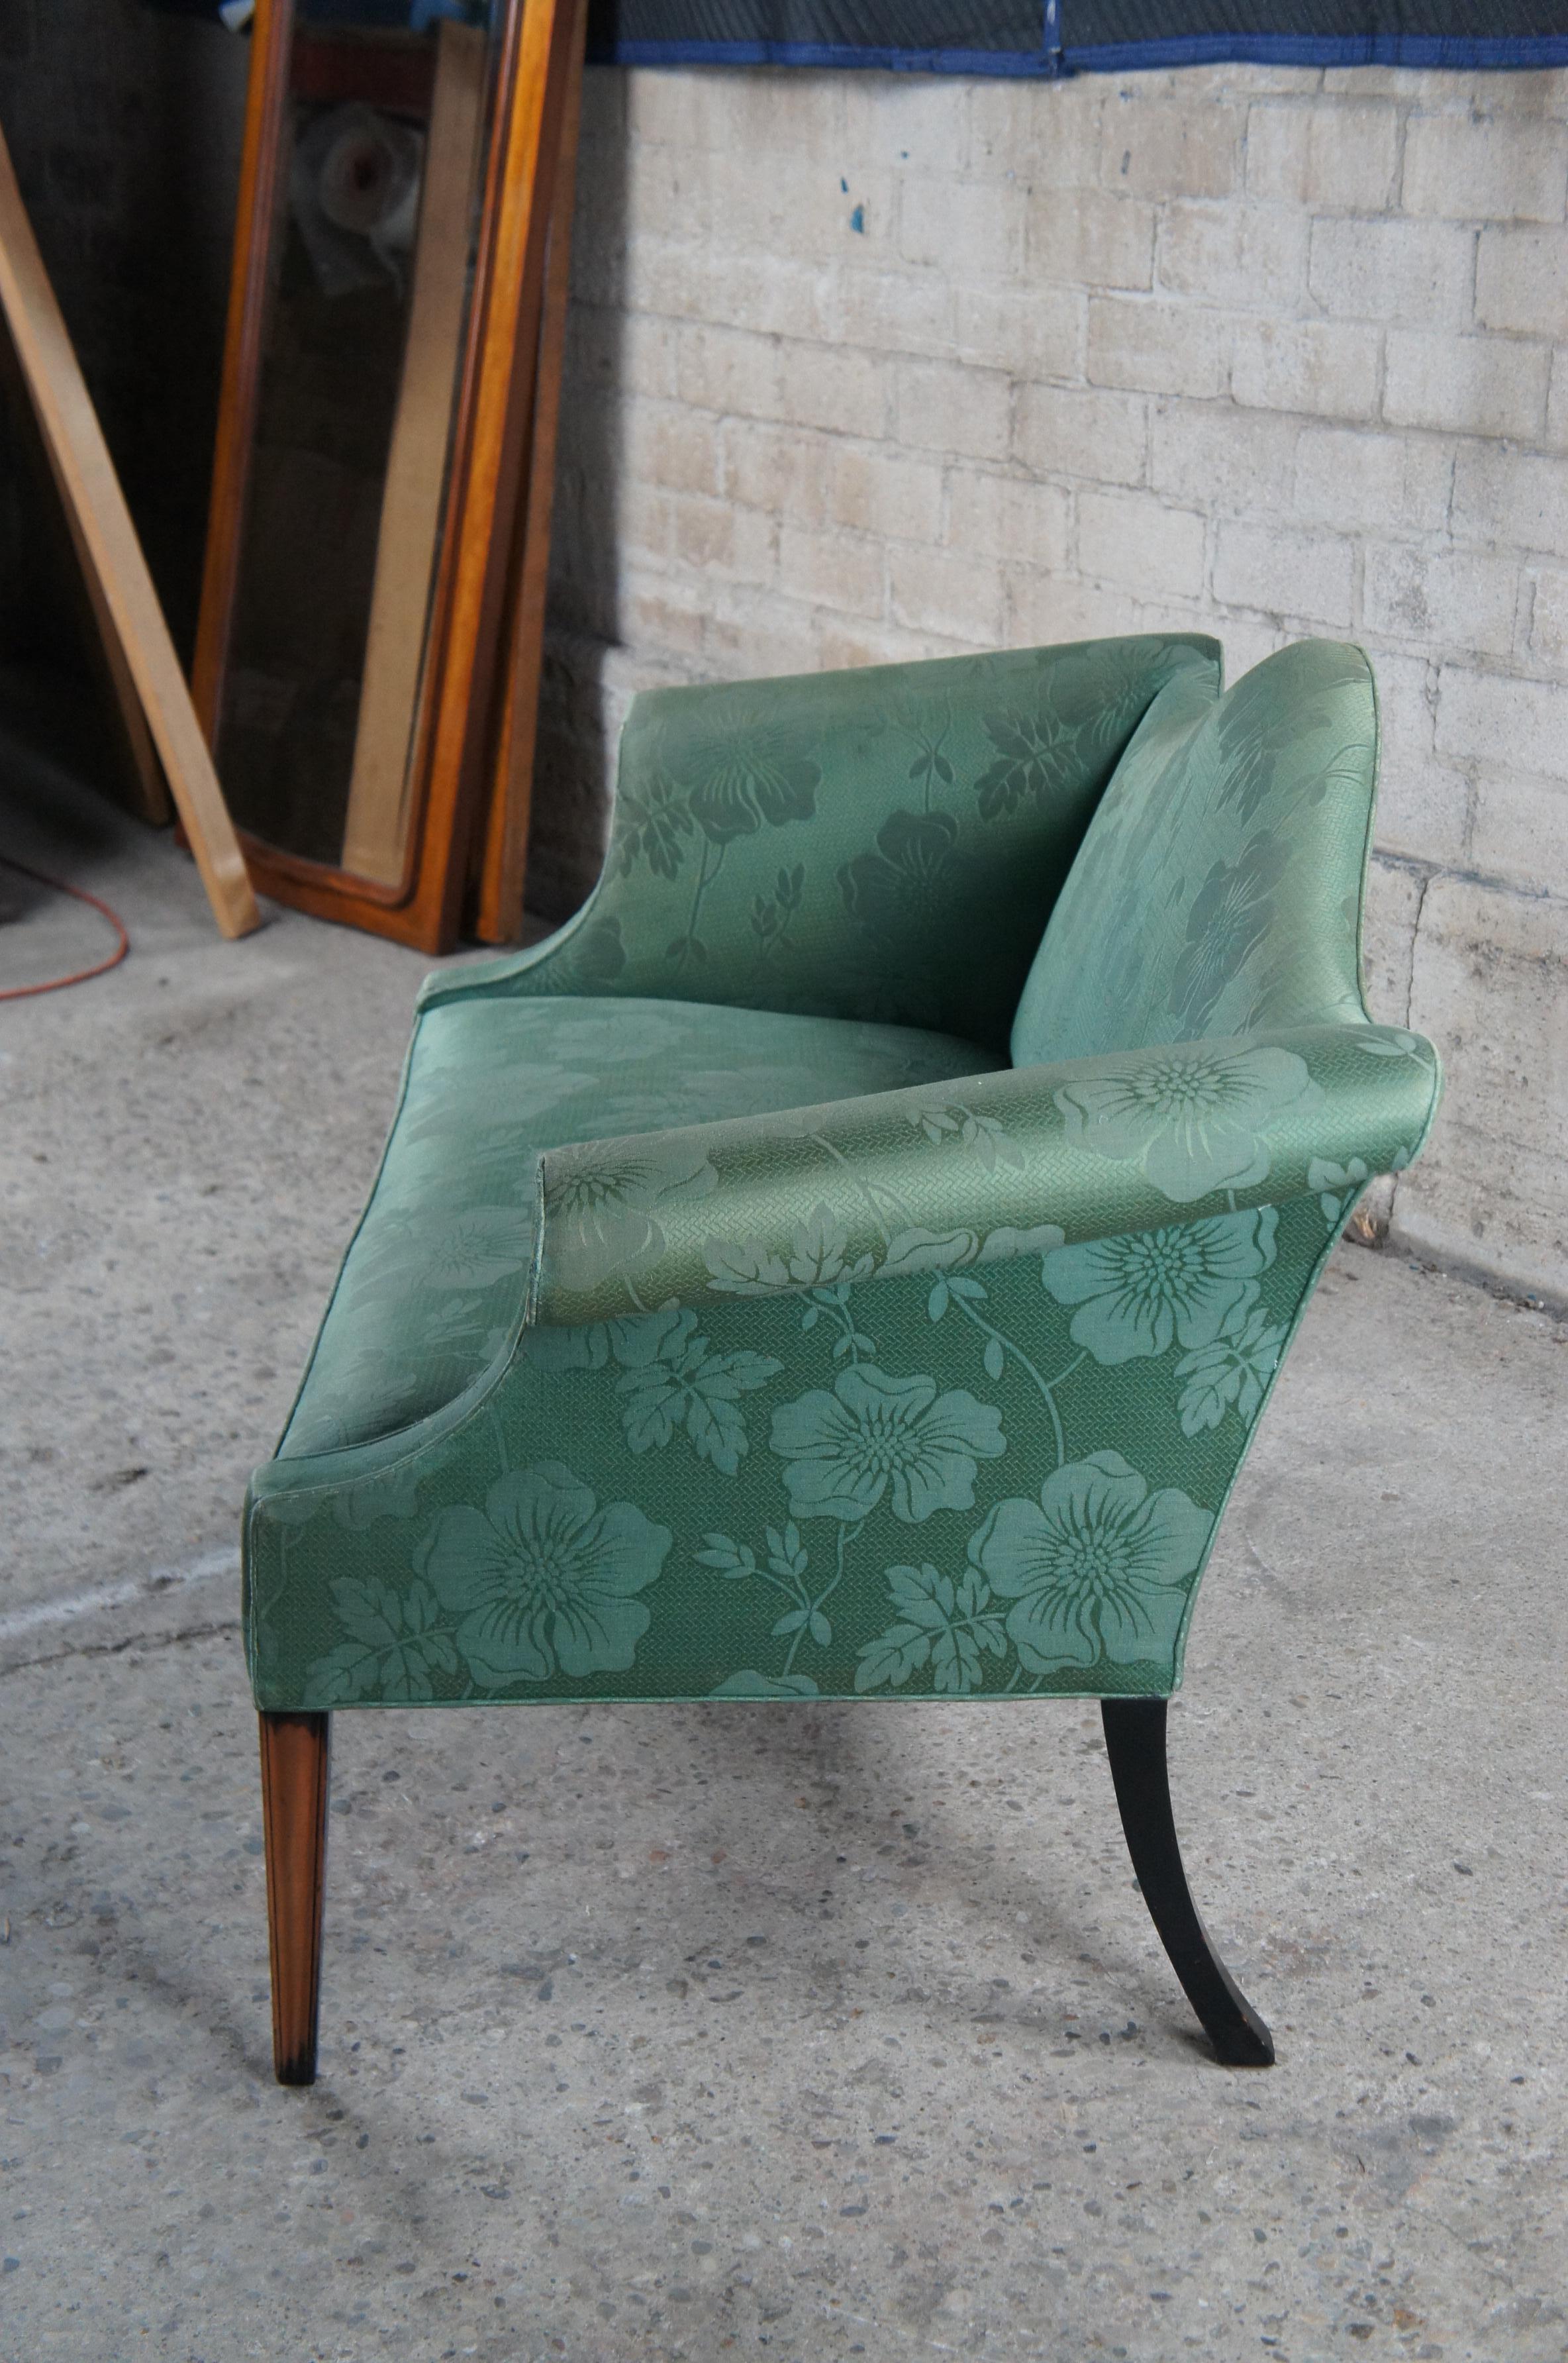 Upholstery 2 Drexel Heritage Federal Style Mahogany Camelback Green Floral Loveseats Settee